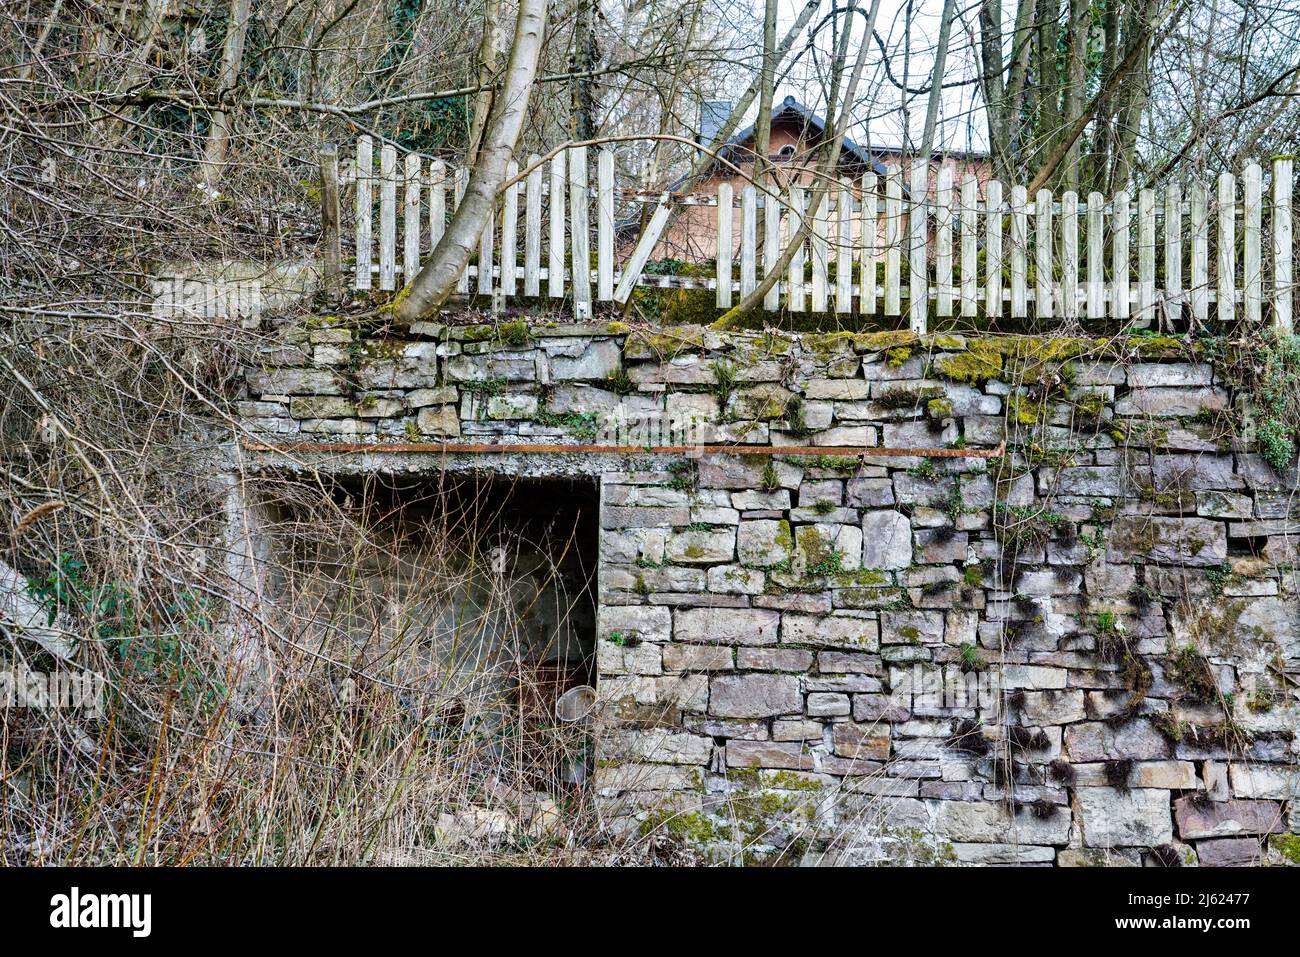 Remains of a house, Germany, Europe Stock Photo